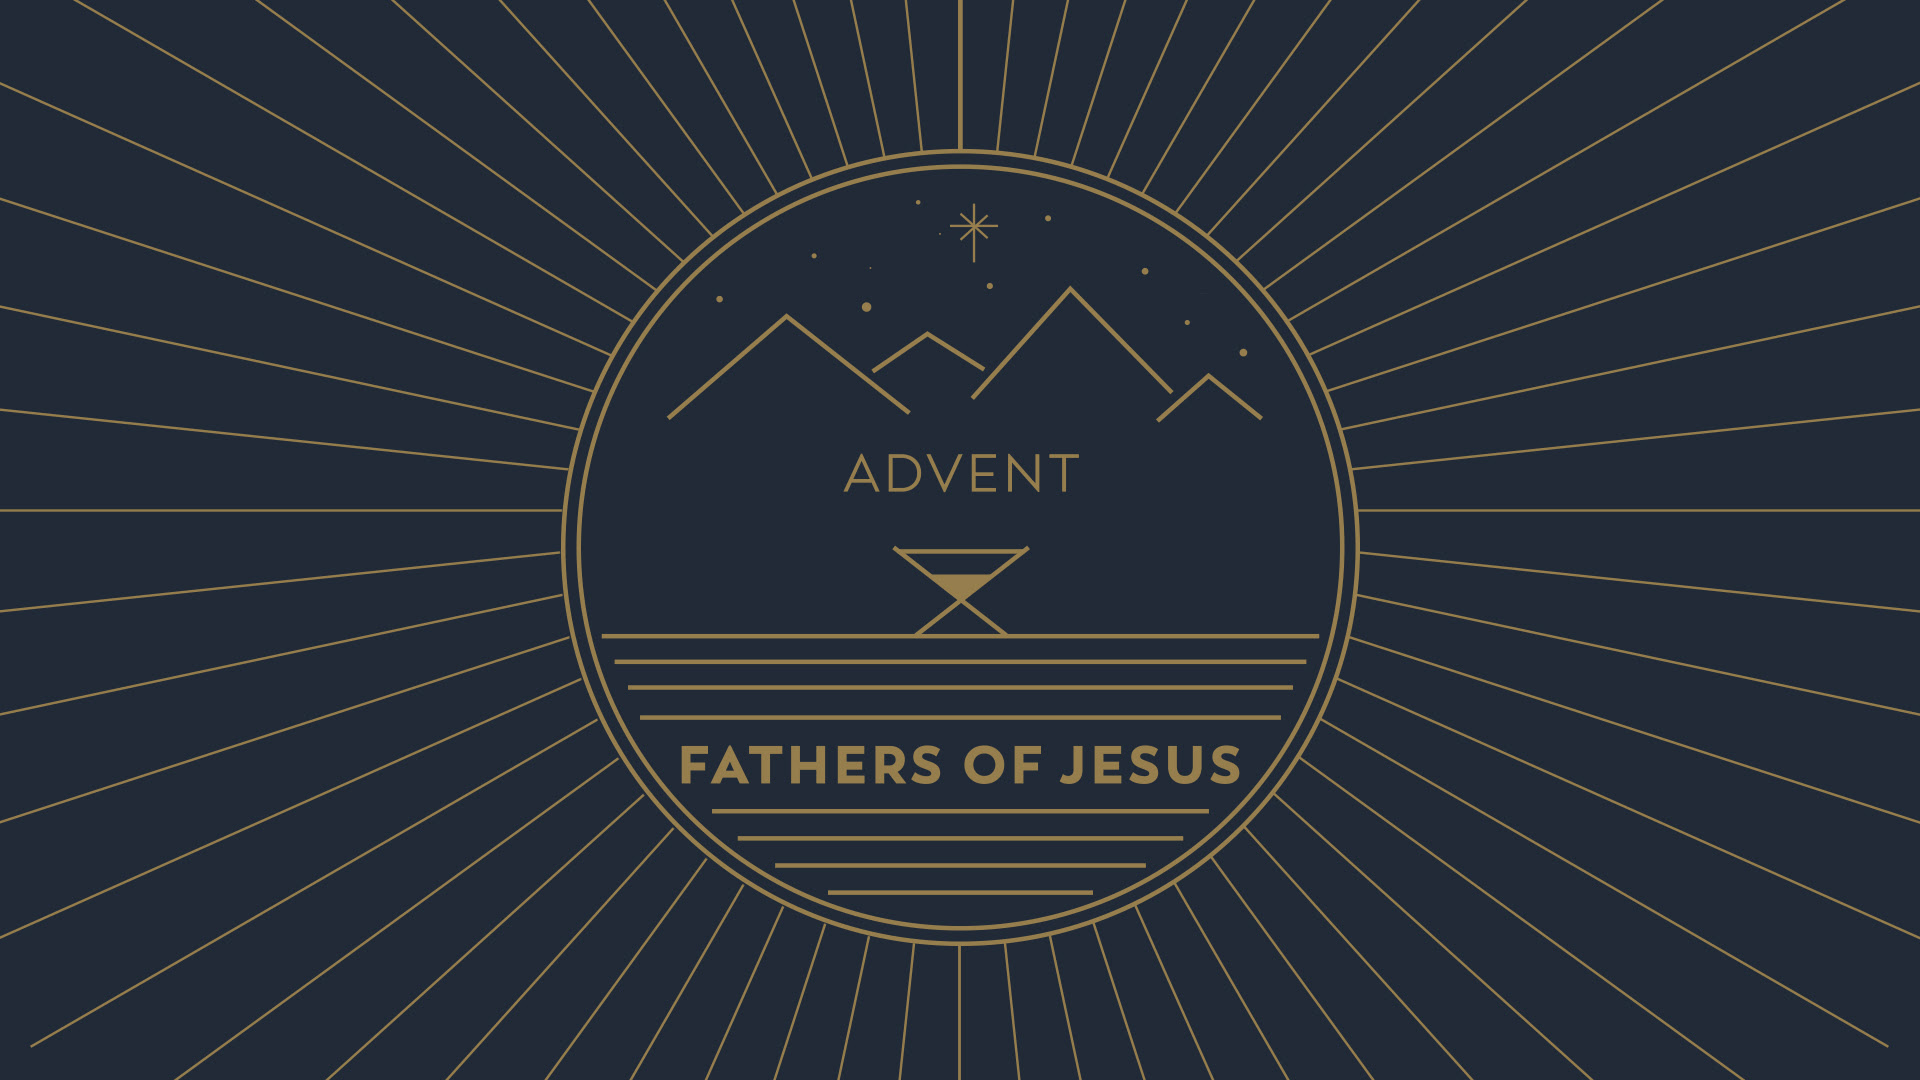 Advent: The "Fathers" of Jesus